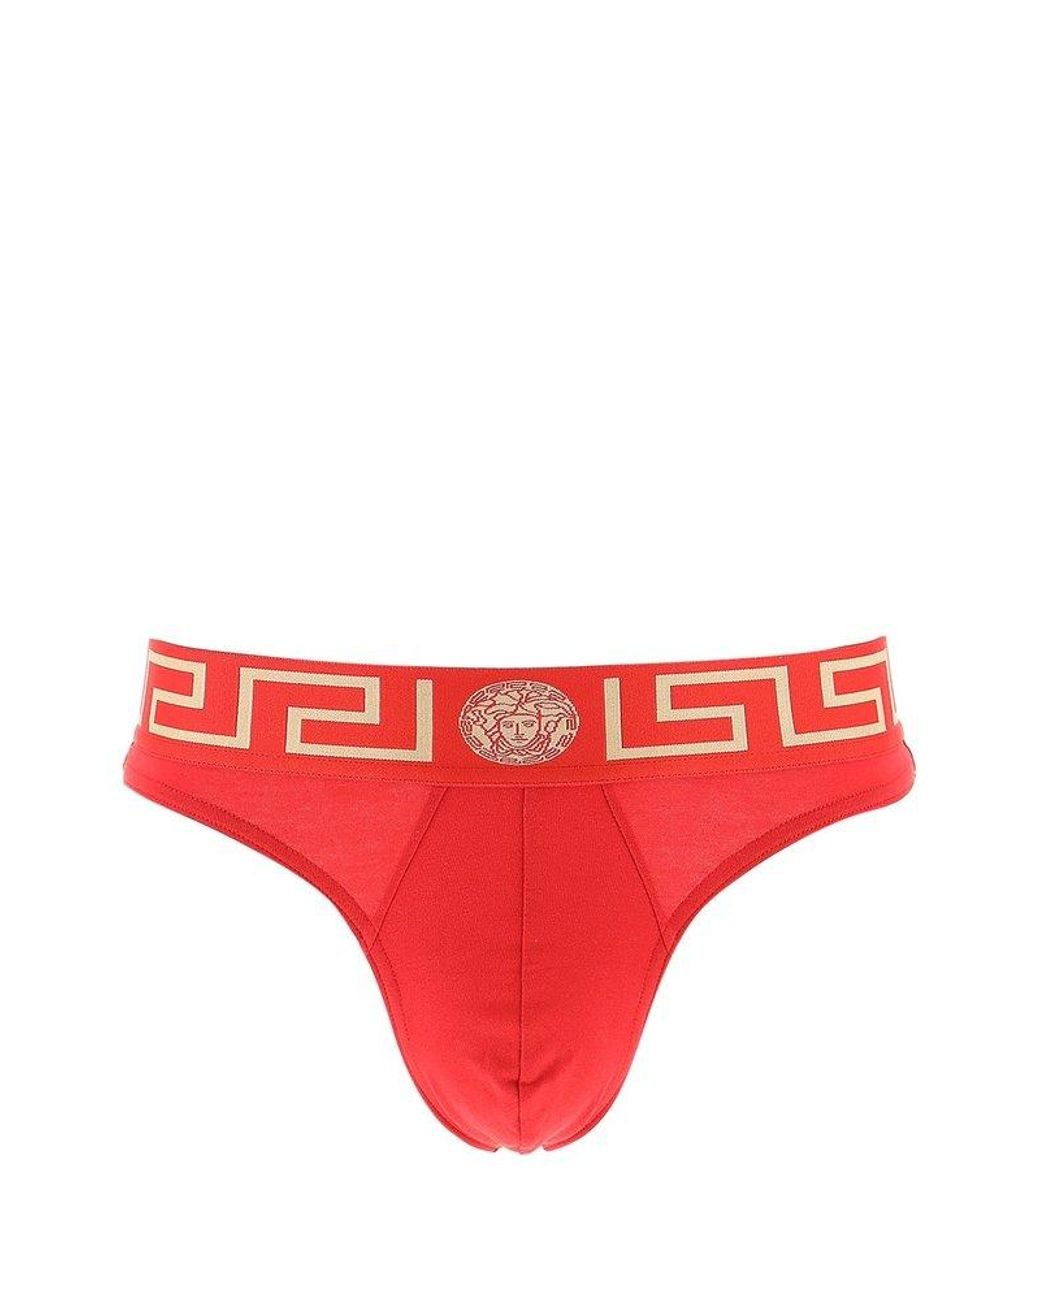 Versace thongs white color